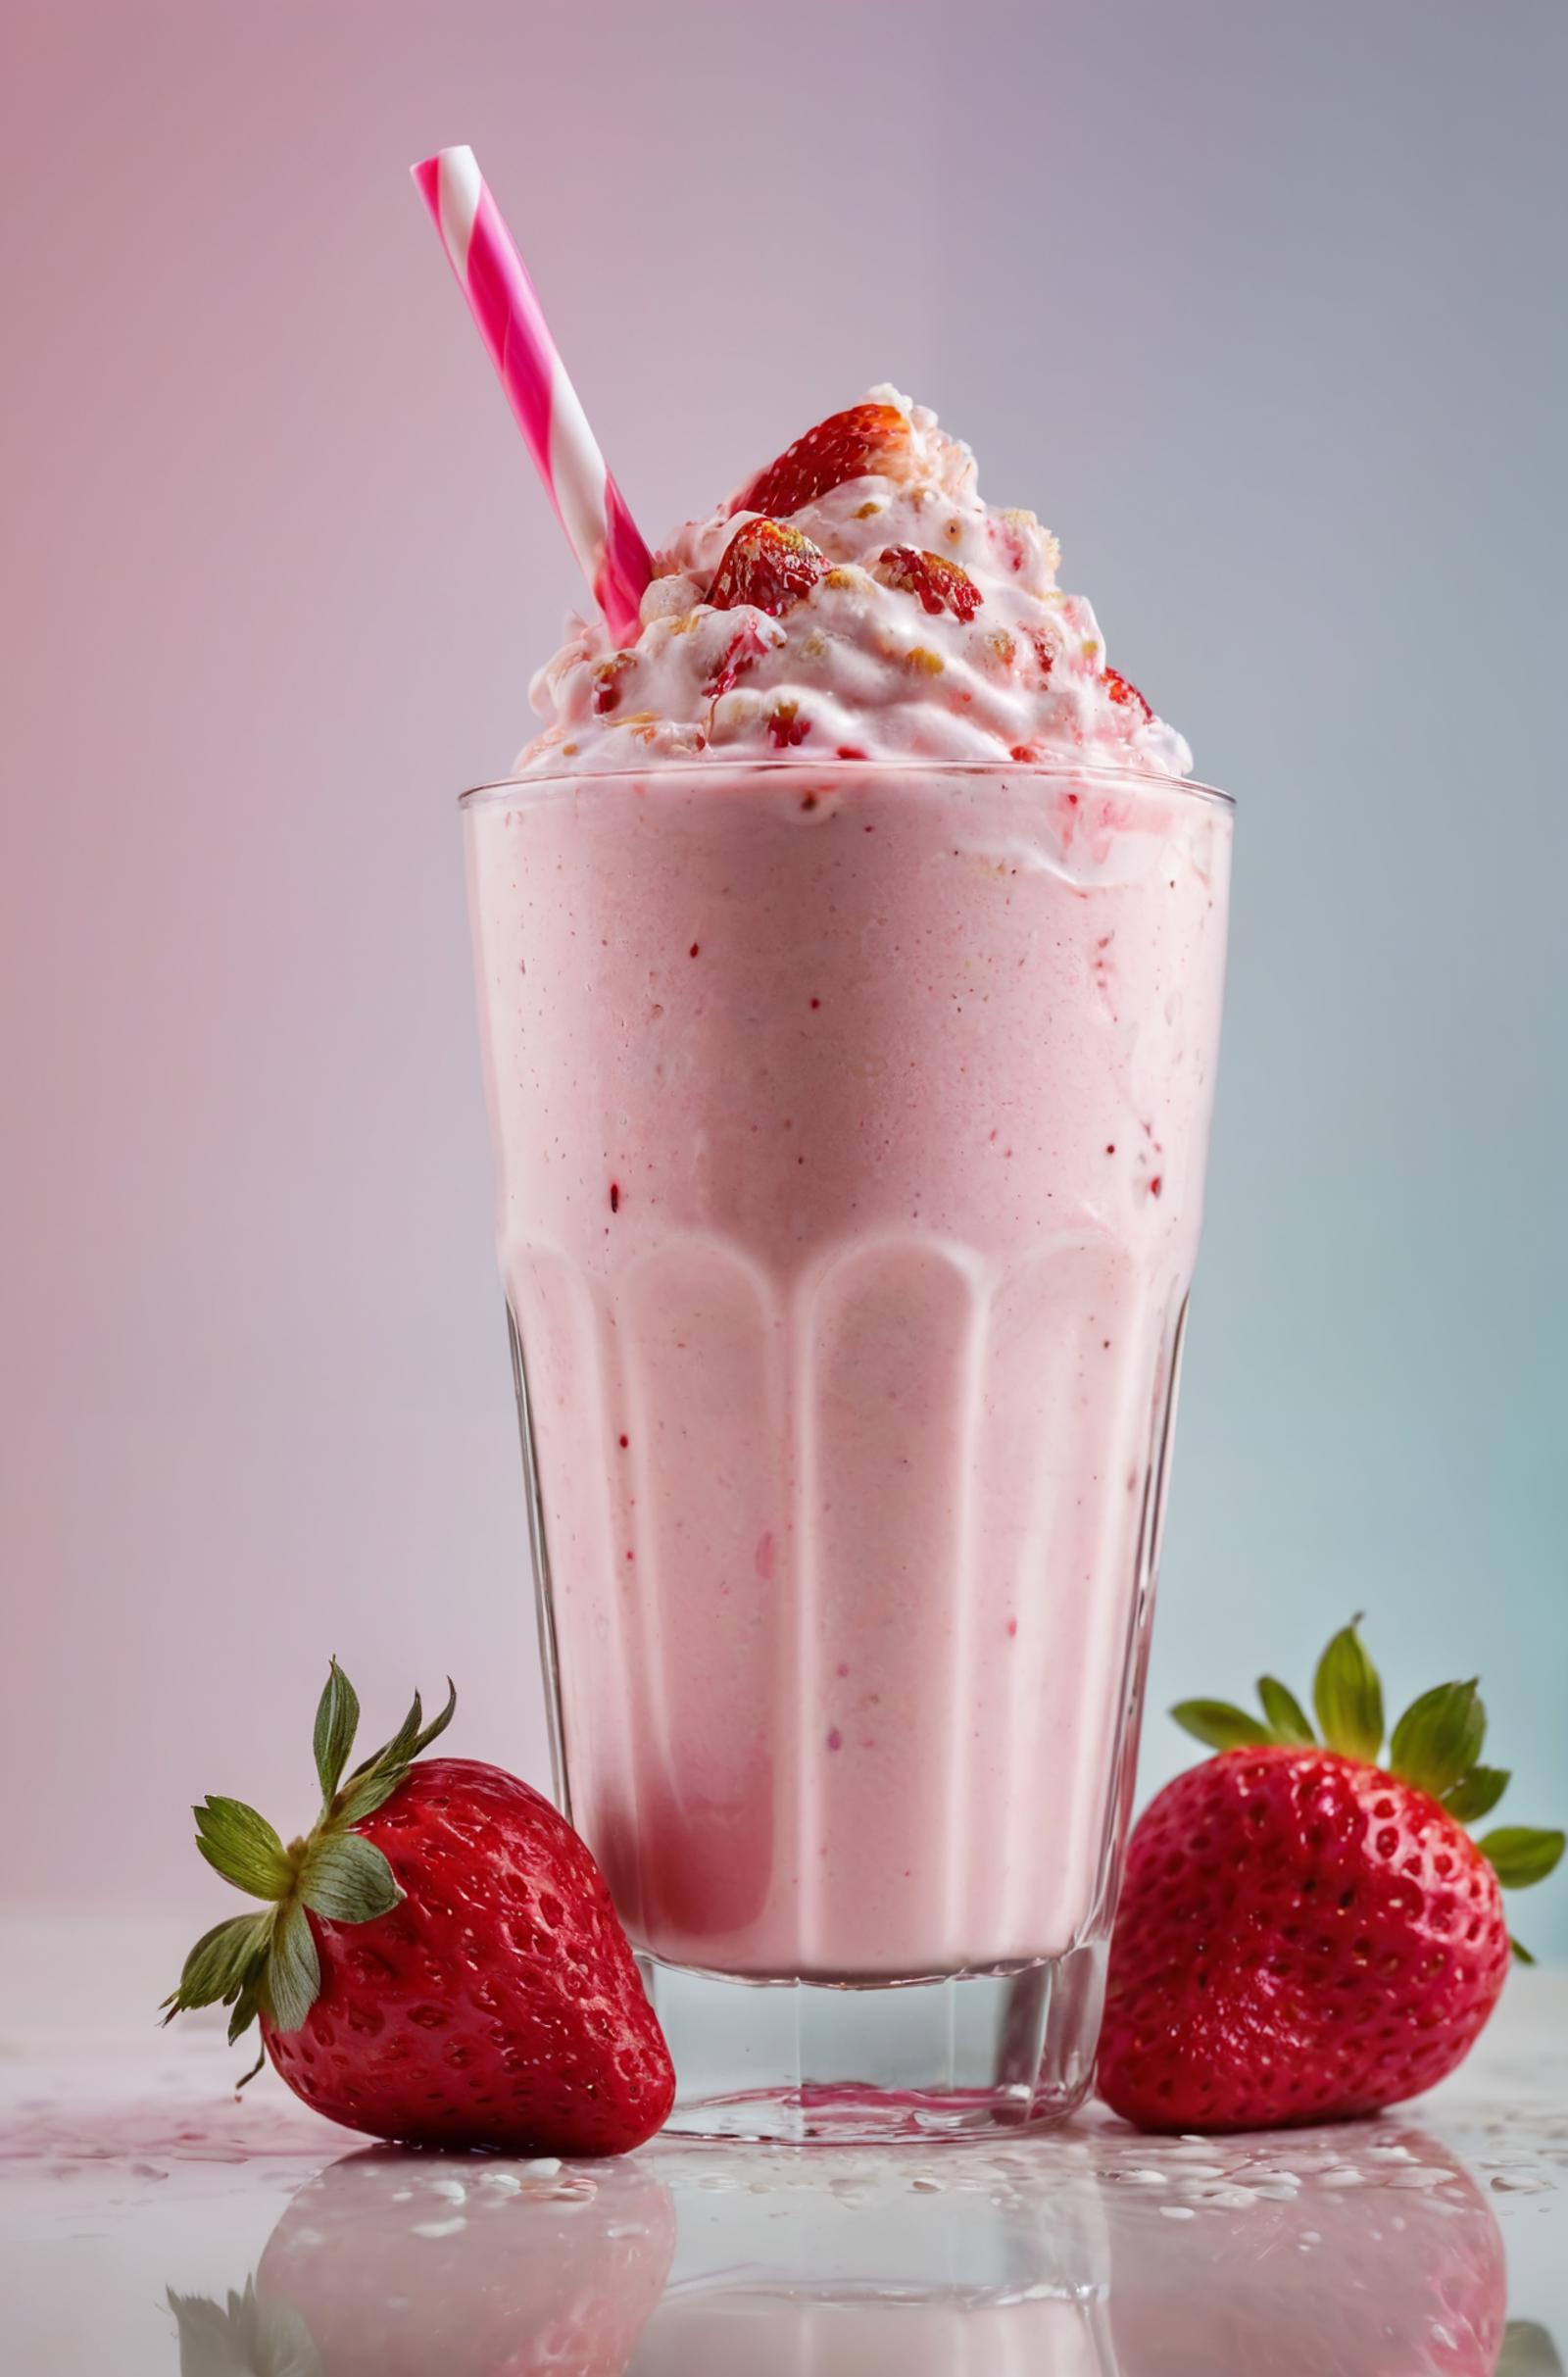 A glass of pink frosted strawberry milkshake with strawberries on the side.